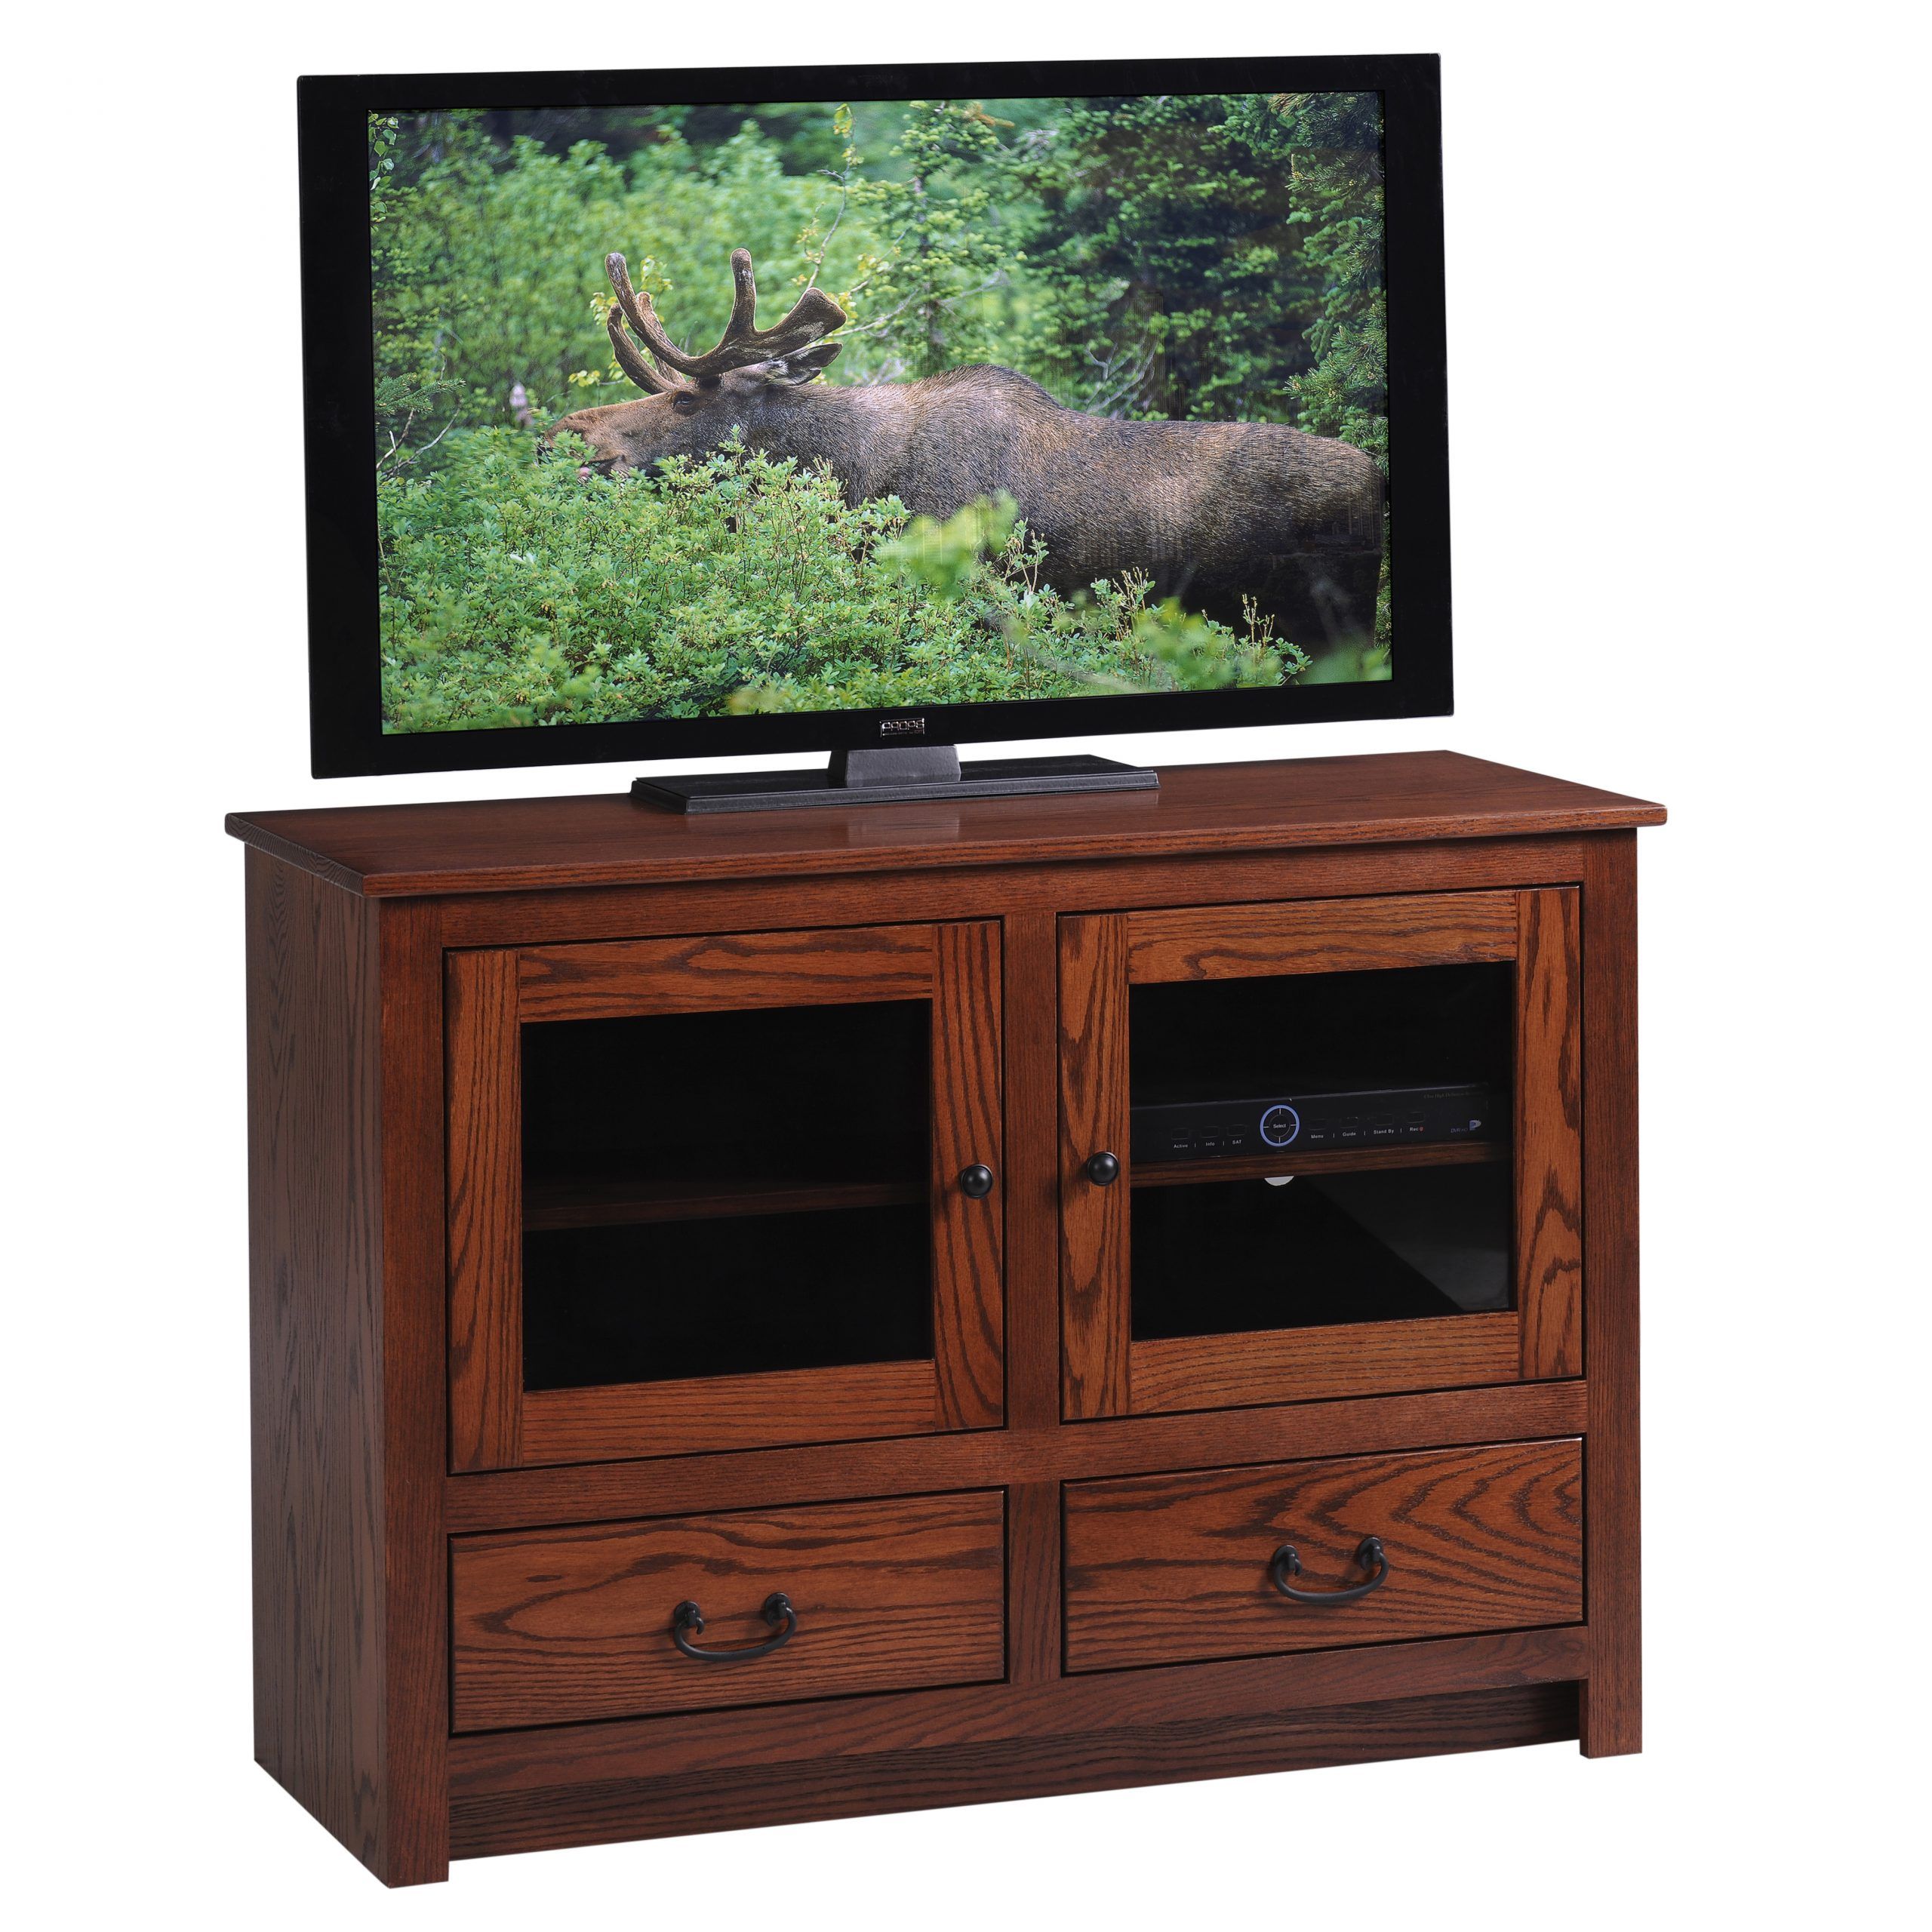 Express Tv Stand Series – Amish Oak Warehouse In Oak Tv Stands (View 10 of 15)